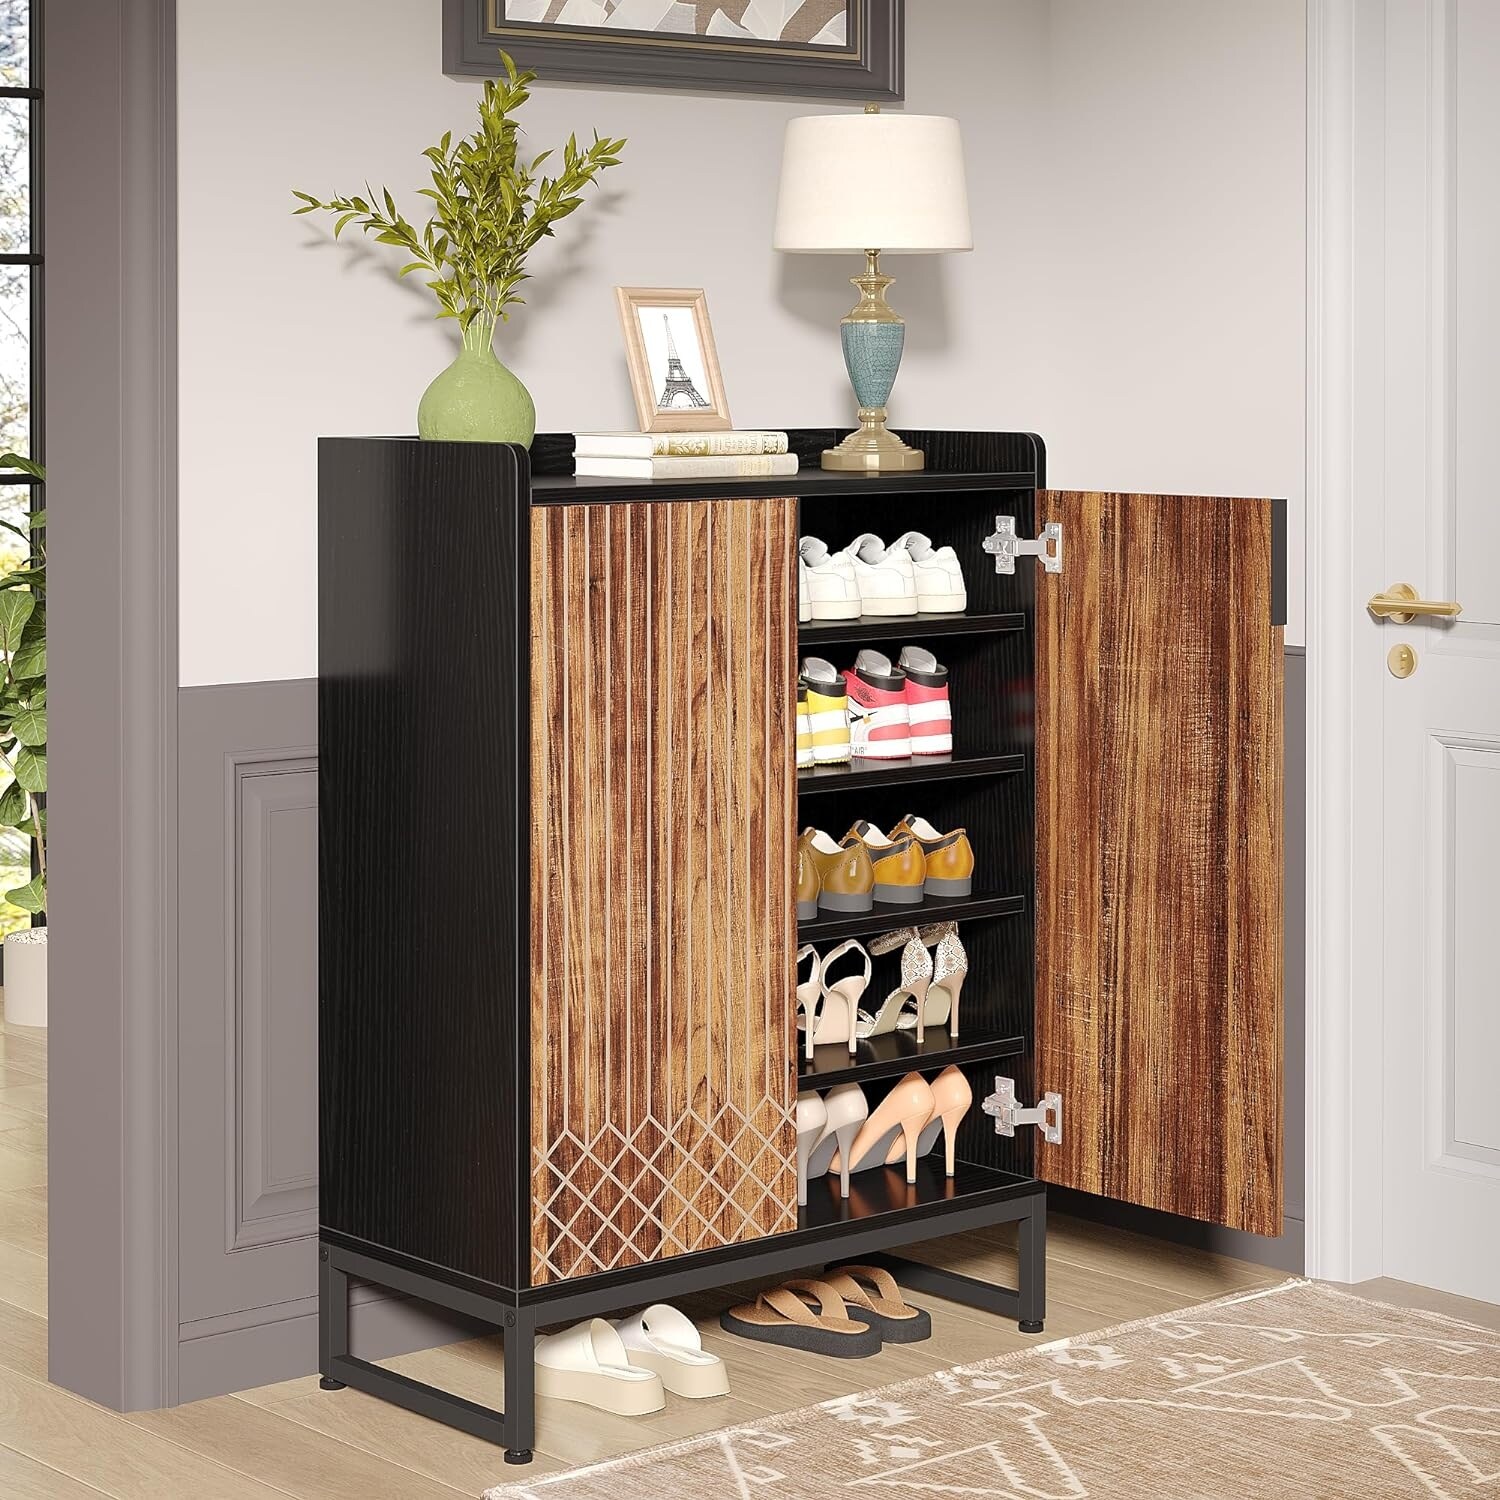 https://ak1.ostkcdn.com/images/products/is/images/direct/27c43d79b5012aaeb8eeed79c8209f28831bcc63/25-Pairs-Shoe-Cabinet-with-Doors%2C-5-Tier-Shoes-Rack-for-Entryway.jpg